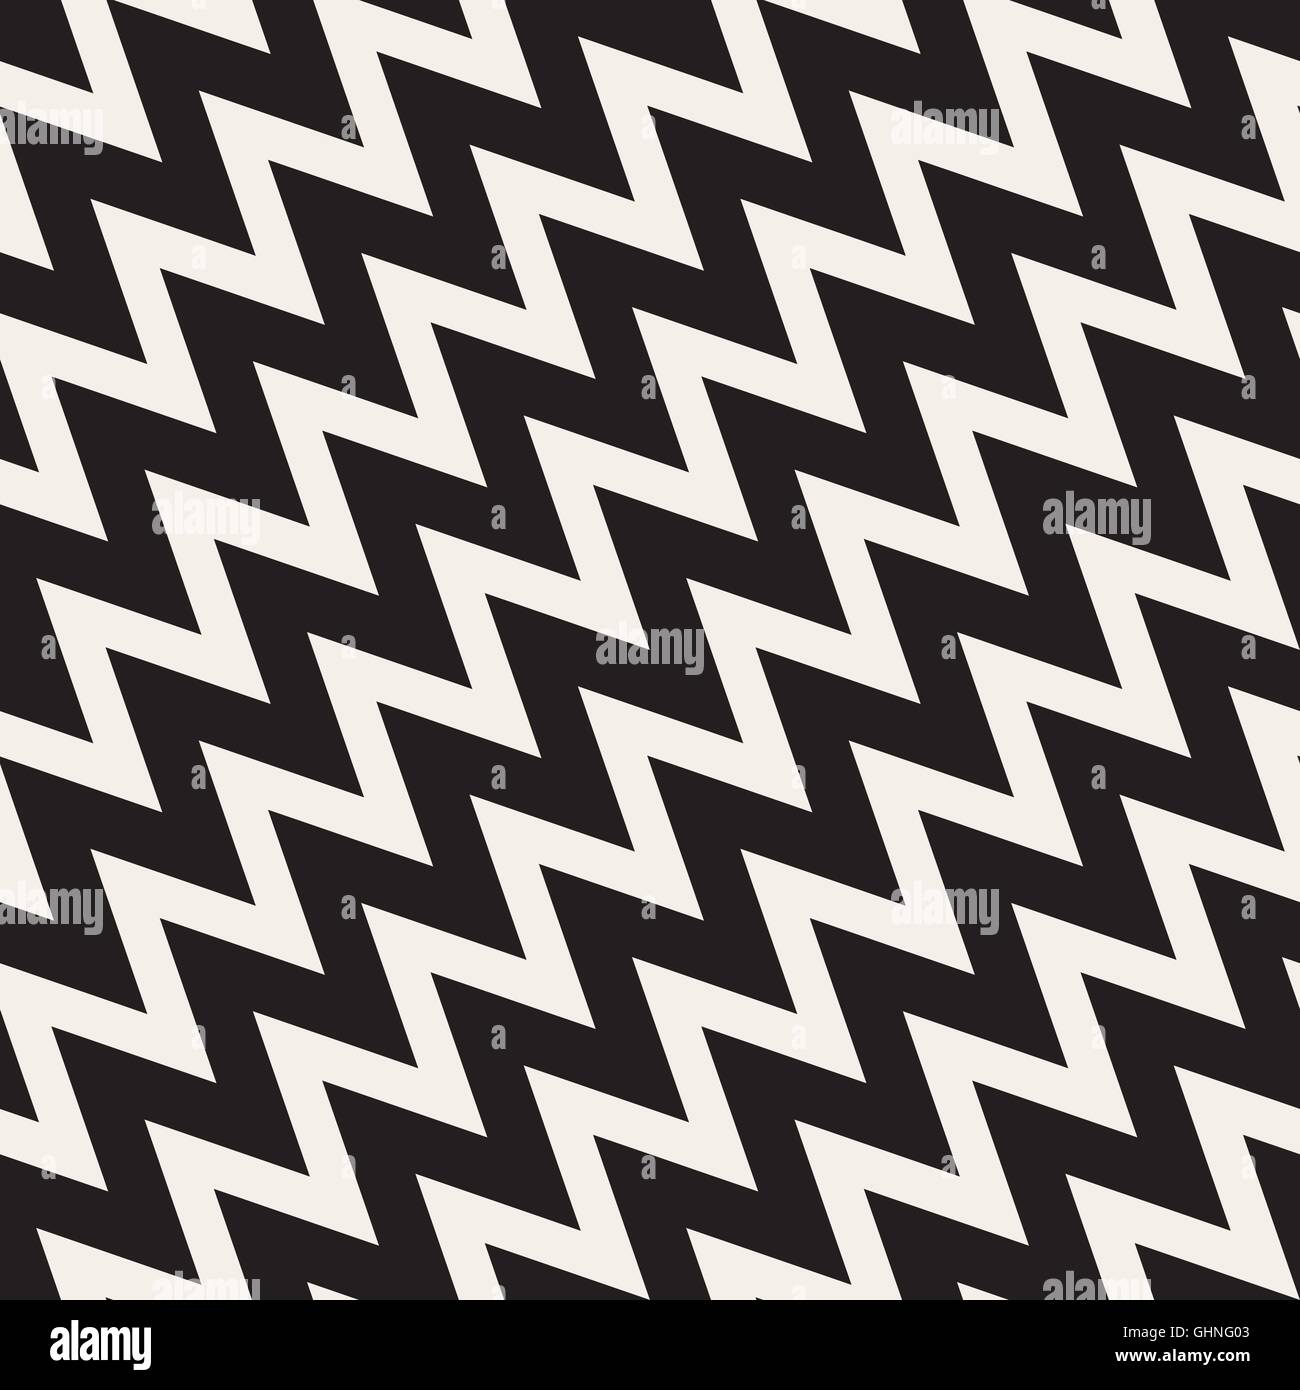 Vector Seamless Black and White ZigZag Diagonal Lines Geometric Pattern ...